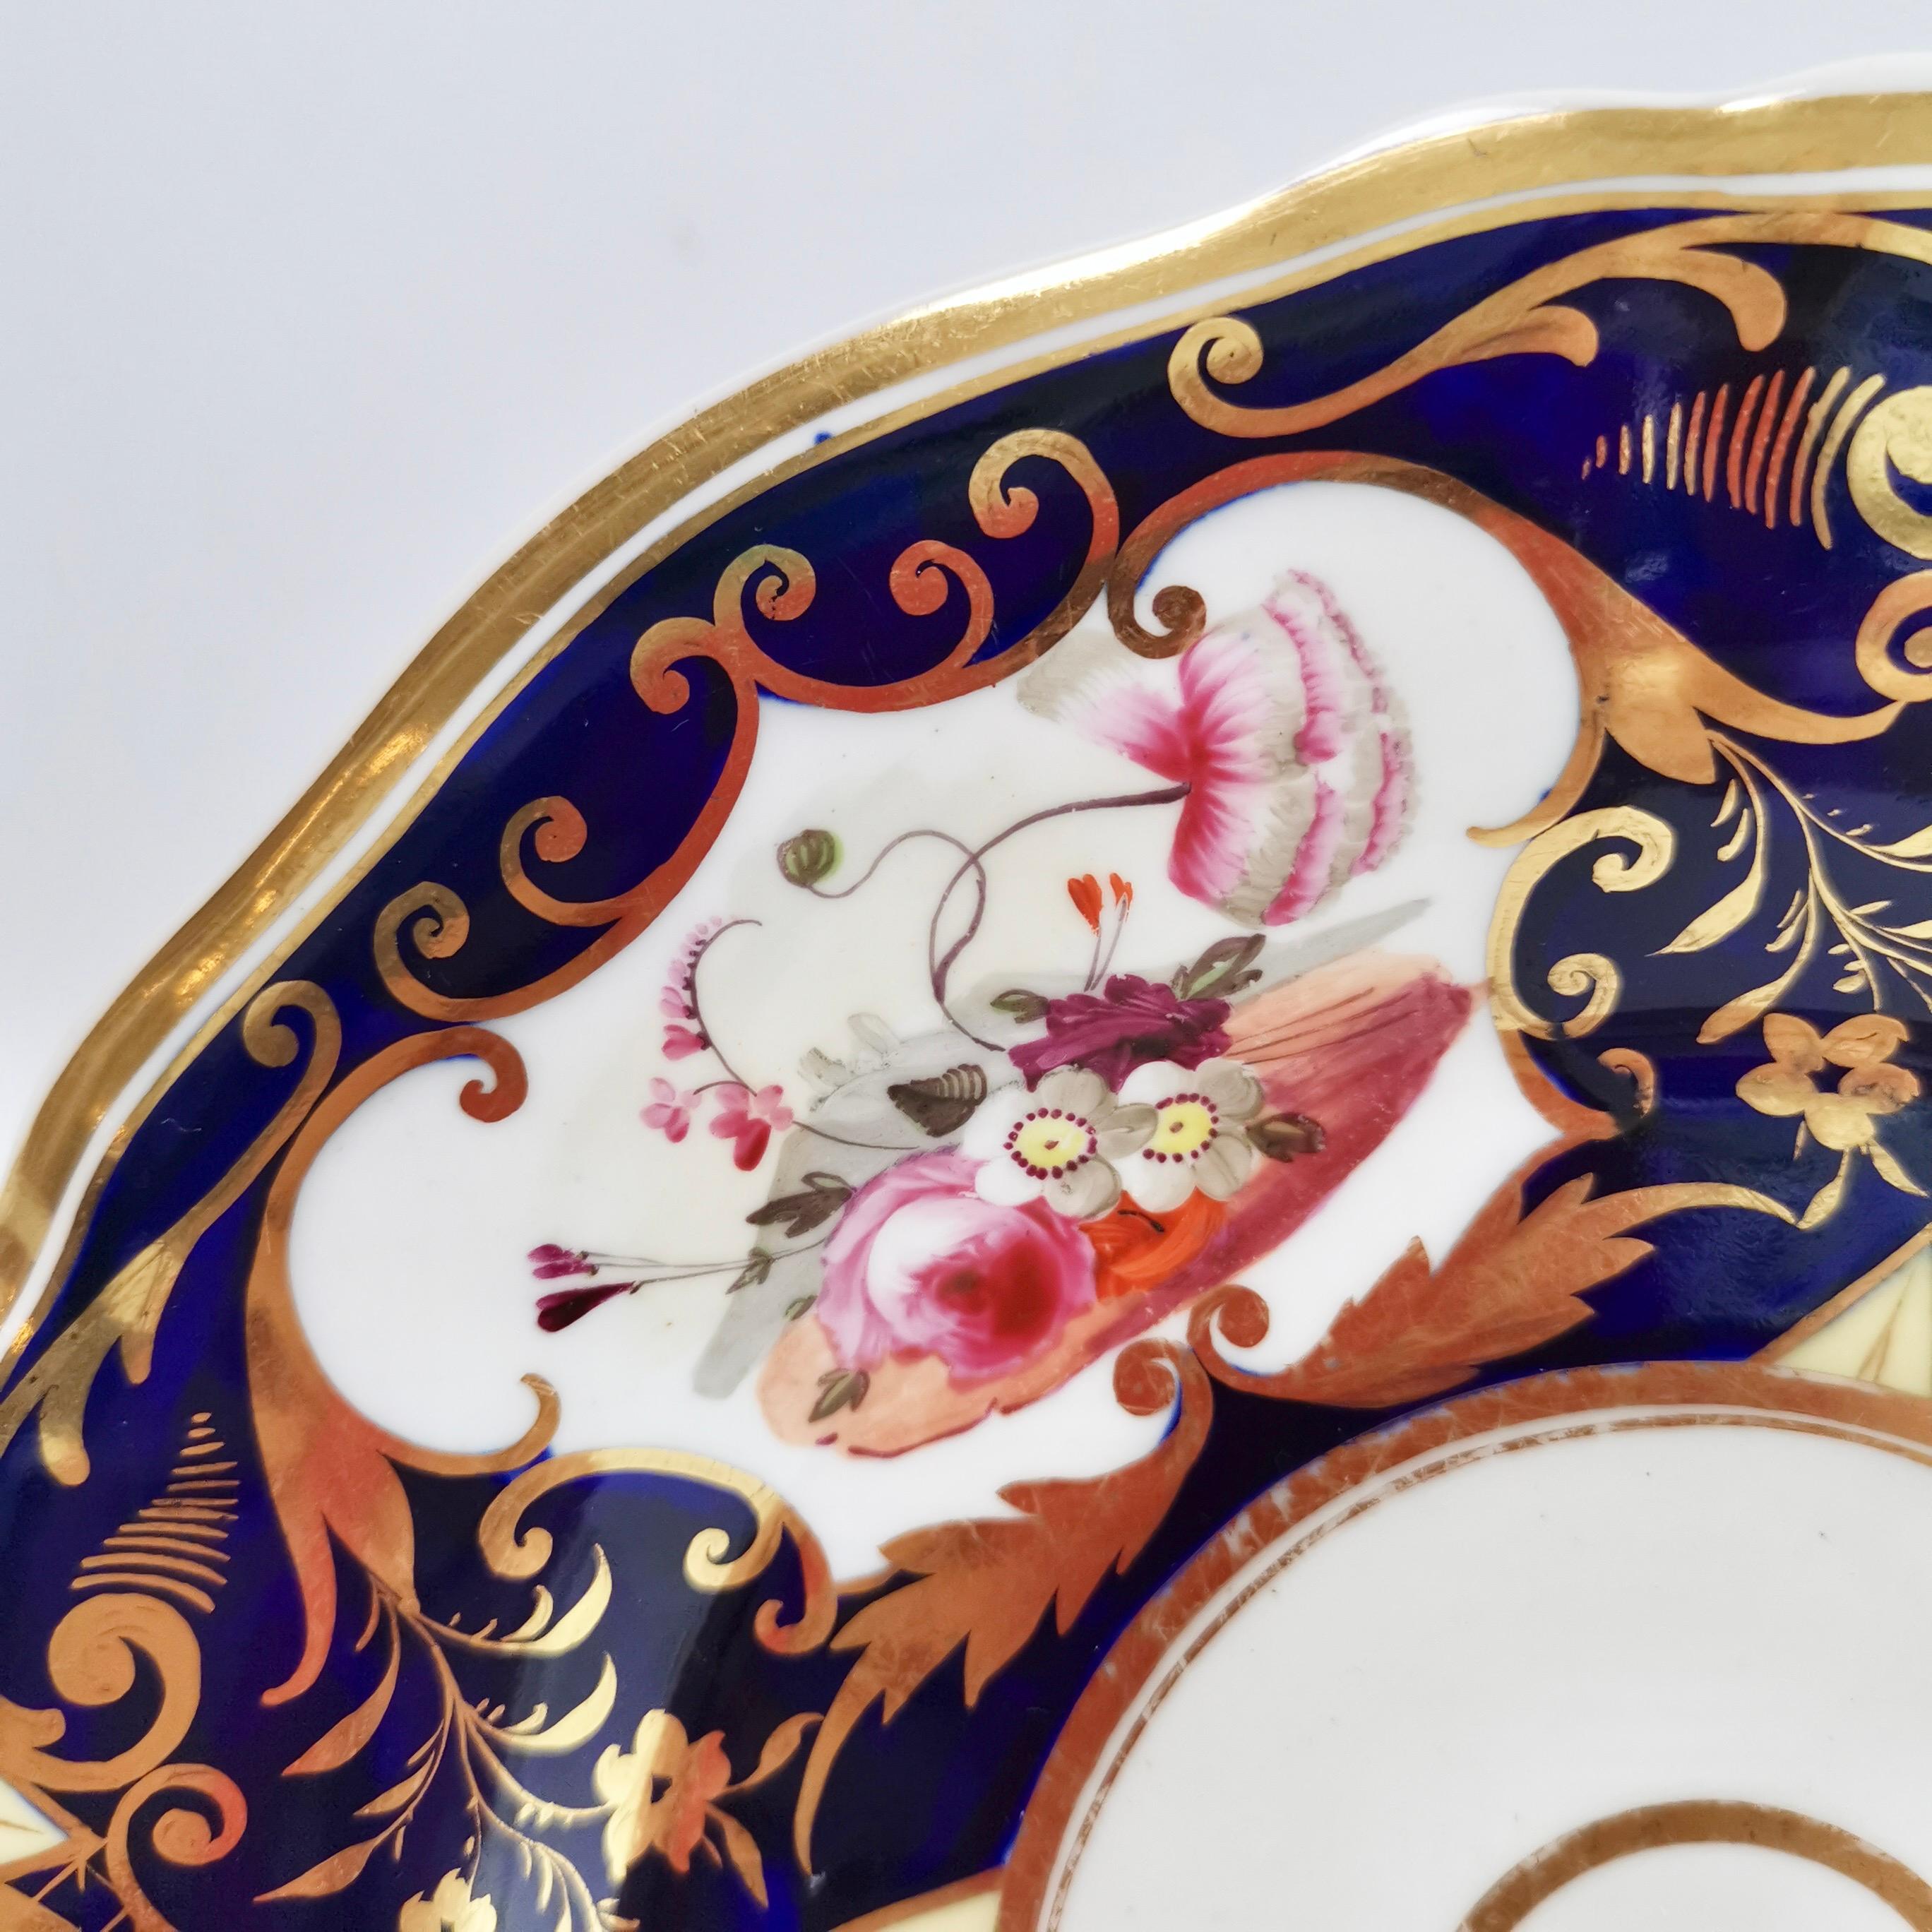 This is a beautiful plate made by Yates in about 1826, which is known as the Regency period. It is decorated with a striking pattern in cobalt blue, gilt and hand painted flowers.
 
I have two of these plates available, please see separate